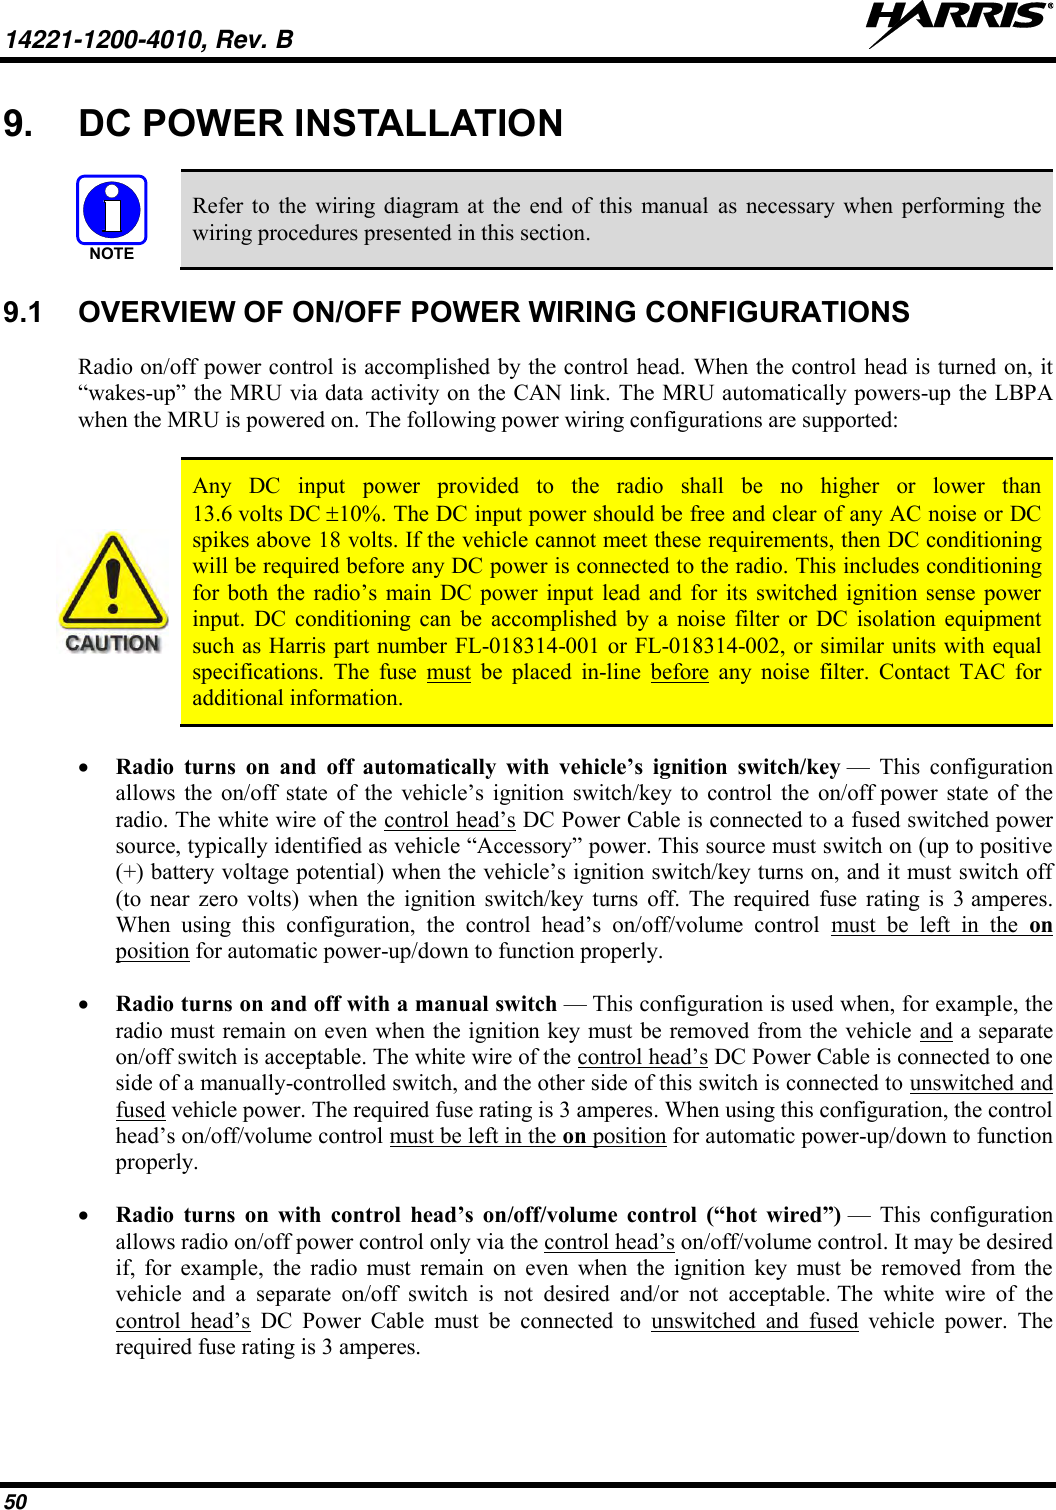 14221-1200-4010, Rev. B   50 9.  DC POWER INSTALLATION   Refer  to  the  wiring  diagram at  the  end  of  this  manual  as  necessary when  performing the wiring procedures presented in this section. 9.1  OVERVIEW OF ON/OFF POWER WIRING CONFIGURATIONS Radio on/off power control is accomplished by the control head. When the control head is turned on, it “wakes-up” the MRU via data activity on the CAN link. The MRU automatically powers-up the LBPA when the MRU is powered on. The following power wiring configurations are supported:   Any  DC  input  power  provided  to  the  radio  shall  be  no  higher  or  lower  than 13.6 volts DC 10%. The DC input power should be free and clear of any AC noise or DC spikes above 18 volts. If the vehicle cannot meet these requirements, then DC conditioning will be required before any DC power is connected to the radio. This includes conditioning for  both the  radio’s main  DC power  input  lead and  for  its  switched ignition  sense  power input.  DC  conditioning  can  be  accomplished  by  a  noise  filter  or  DC  isolation  equipment such as Harris part number FL-018314-001 or FL-018314-002, or similar units with equal specifications.  The  fuse  must  be  placed  in-line  before  any  noise  filter.  Contact  TAC  for additional information.  Radio  turns  on  and  off  automatically  with  vehicle’s  ignition  switch/key —  This  configuration allows  the  on/off  state  of  the  vehicle’s  ignition switch/key  to  control  the  on/off power  state  of  the radio. The white wire of the control head’s DC Power Cable is connected to a fused switched power source, typically identified as vehicle “Accessory” power. This source must switch on (up to positive (+) battery voltage potential) when the vehicle’s ignition switch/key turns on, and it must switch off (to  near  zero  volts)  when  the  ignition  switch/key  turns  off.  The  required  fuse  rating  is  3 amperes. When  using  this  configuration,  the  control  head’s  on/off/volume  control  must  be  left  in  the  on position for automatic power-up/down to function properly.  Radio turns on and off with a manual switch — This configuration is used when, for example, the radio must remain on even when the ignition key must be removed from the vehicle and a separate on/off switch is acceptable. The white wire of the control head’s DC Power Cable is connected to one side of a manually-controlled switch, and the other side of this switch is connected to unswitched and fused vehicle power. The required fuse rating is 3 amperes. When using this configuration, the control head’s on/off/volume control must be left in the on position for automatic power-up/down to function properly.  Radio  turns  on  with  control  head’s  on/off/volume  control  (“hot  wired”) —  This  configuration allows radio on/off power control only via the control head’s on/off/volume control. It may be desired if,  for  example,  the  radio  must  remain  on  even  when  the  ignition  key  must  be  removed  from  the vehicle  and  a  separate  on/off  switch  is  not  desired  and/or  not  acceptable. The  white  wire  of  the control  head’s  DC  Power  Cable  must  be  connected  to  unswitched  and  fused  vehicle  power.  The required fuse rating is 3 amperes. NOTE